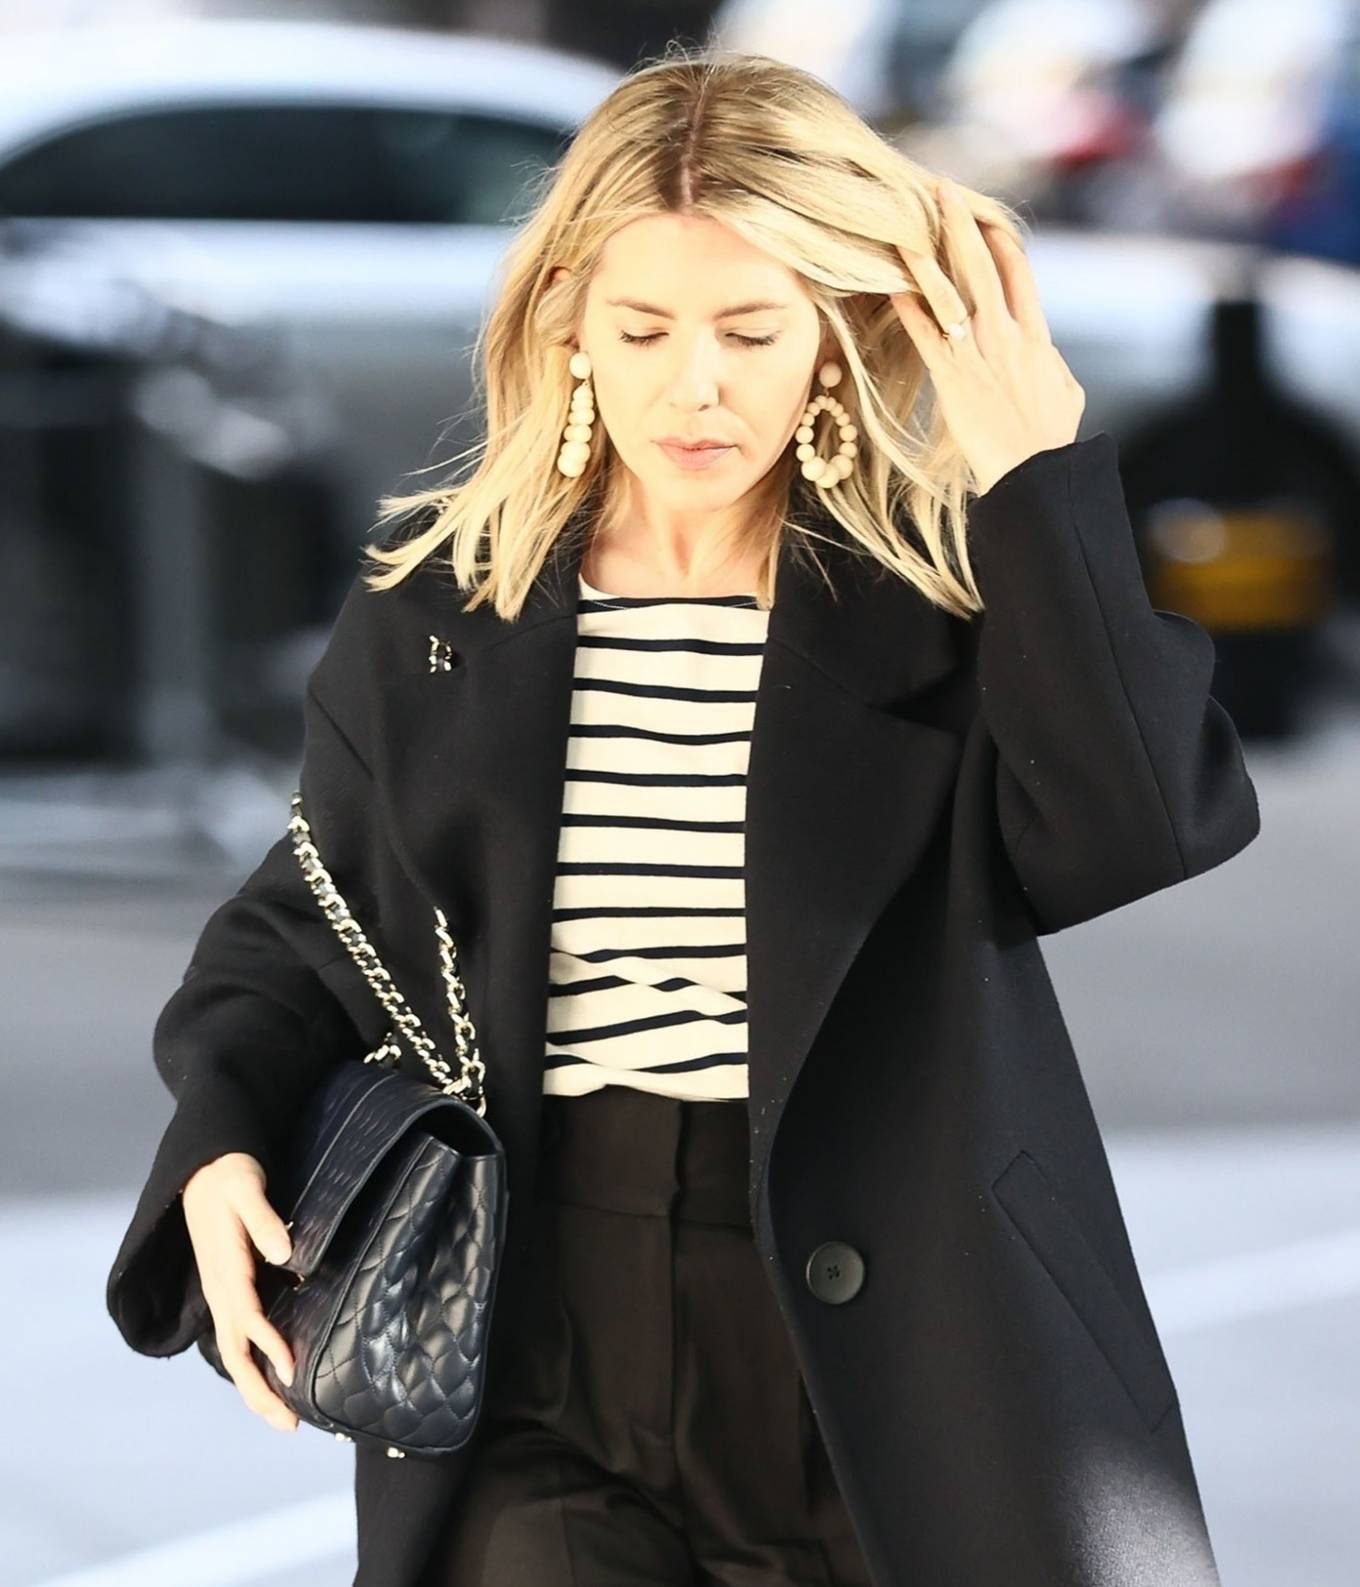 Mollie King – In a black coat at the BBC Radio One Studios in London